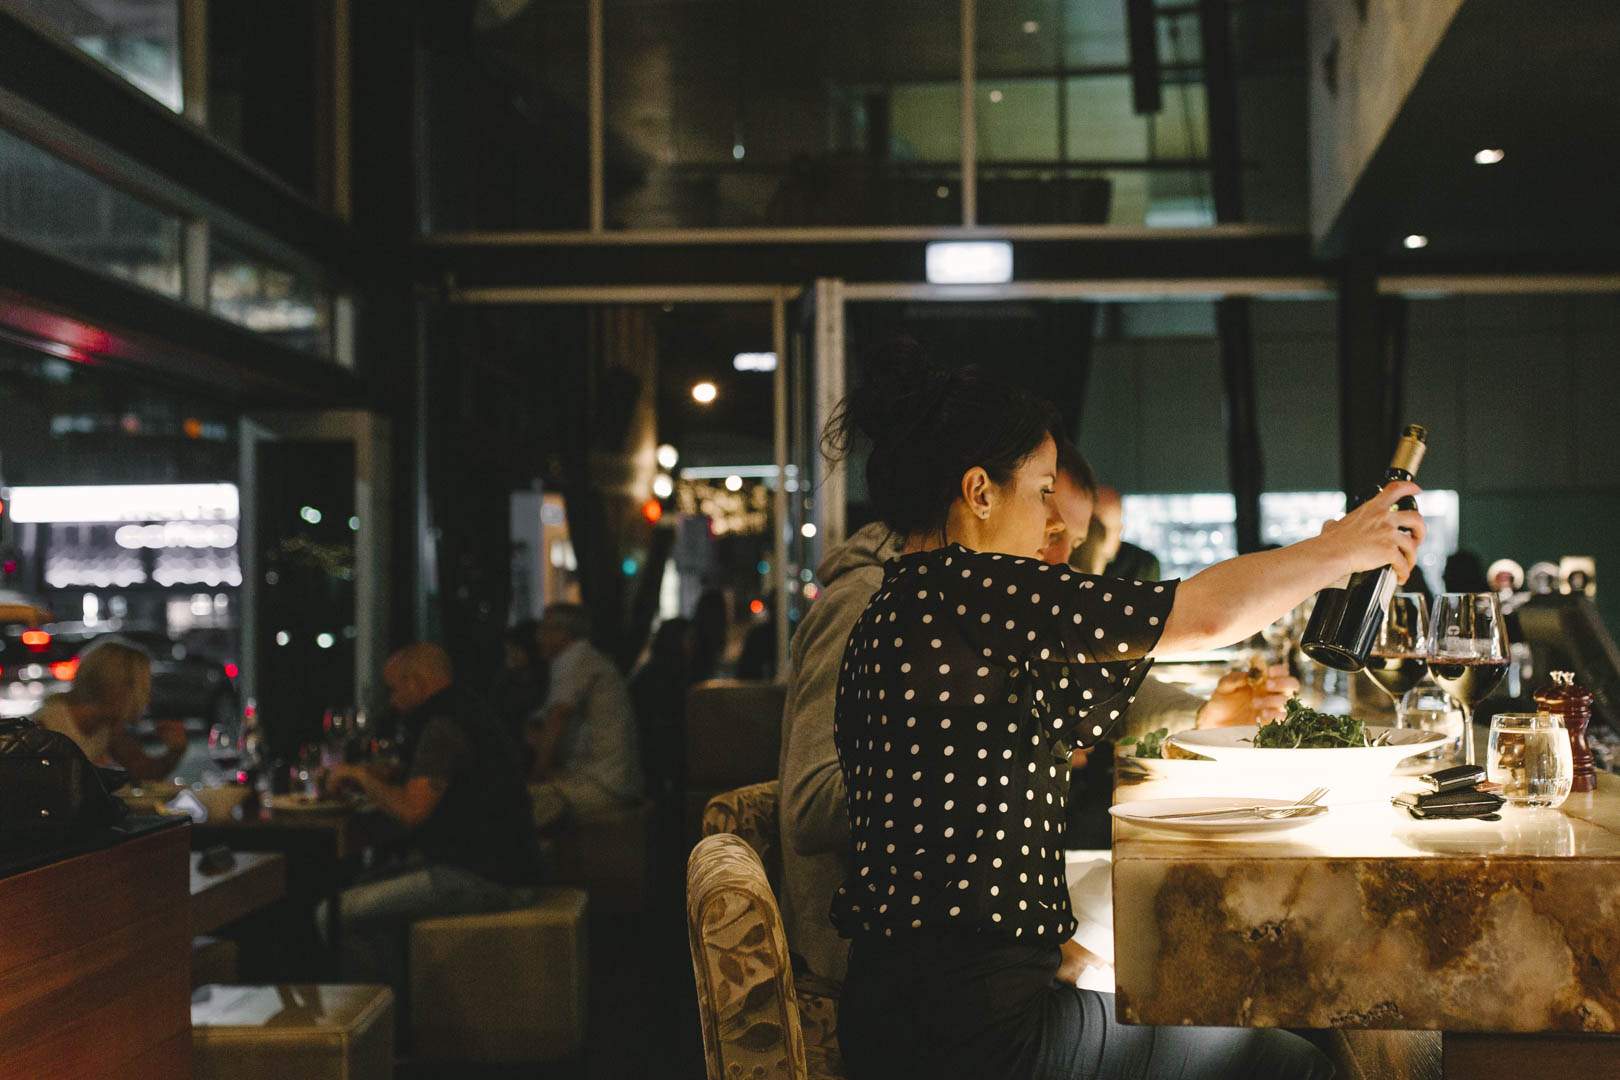 Brisbane's Least Awkward Spots for a First Date